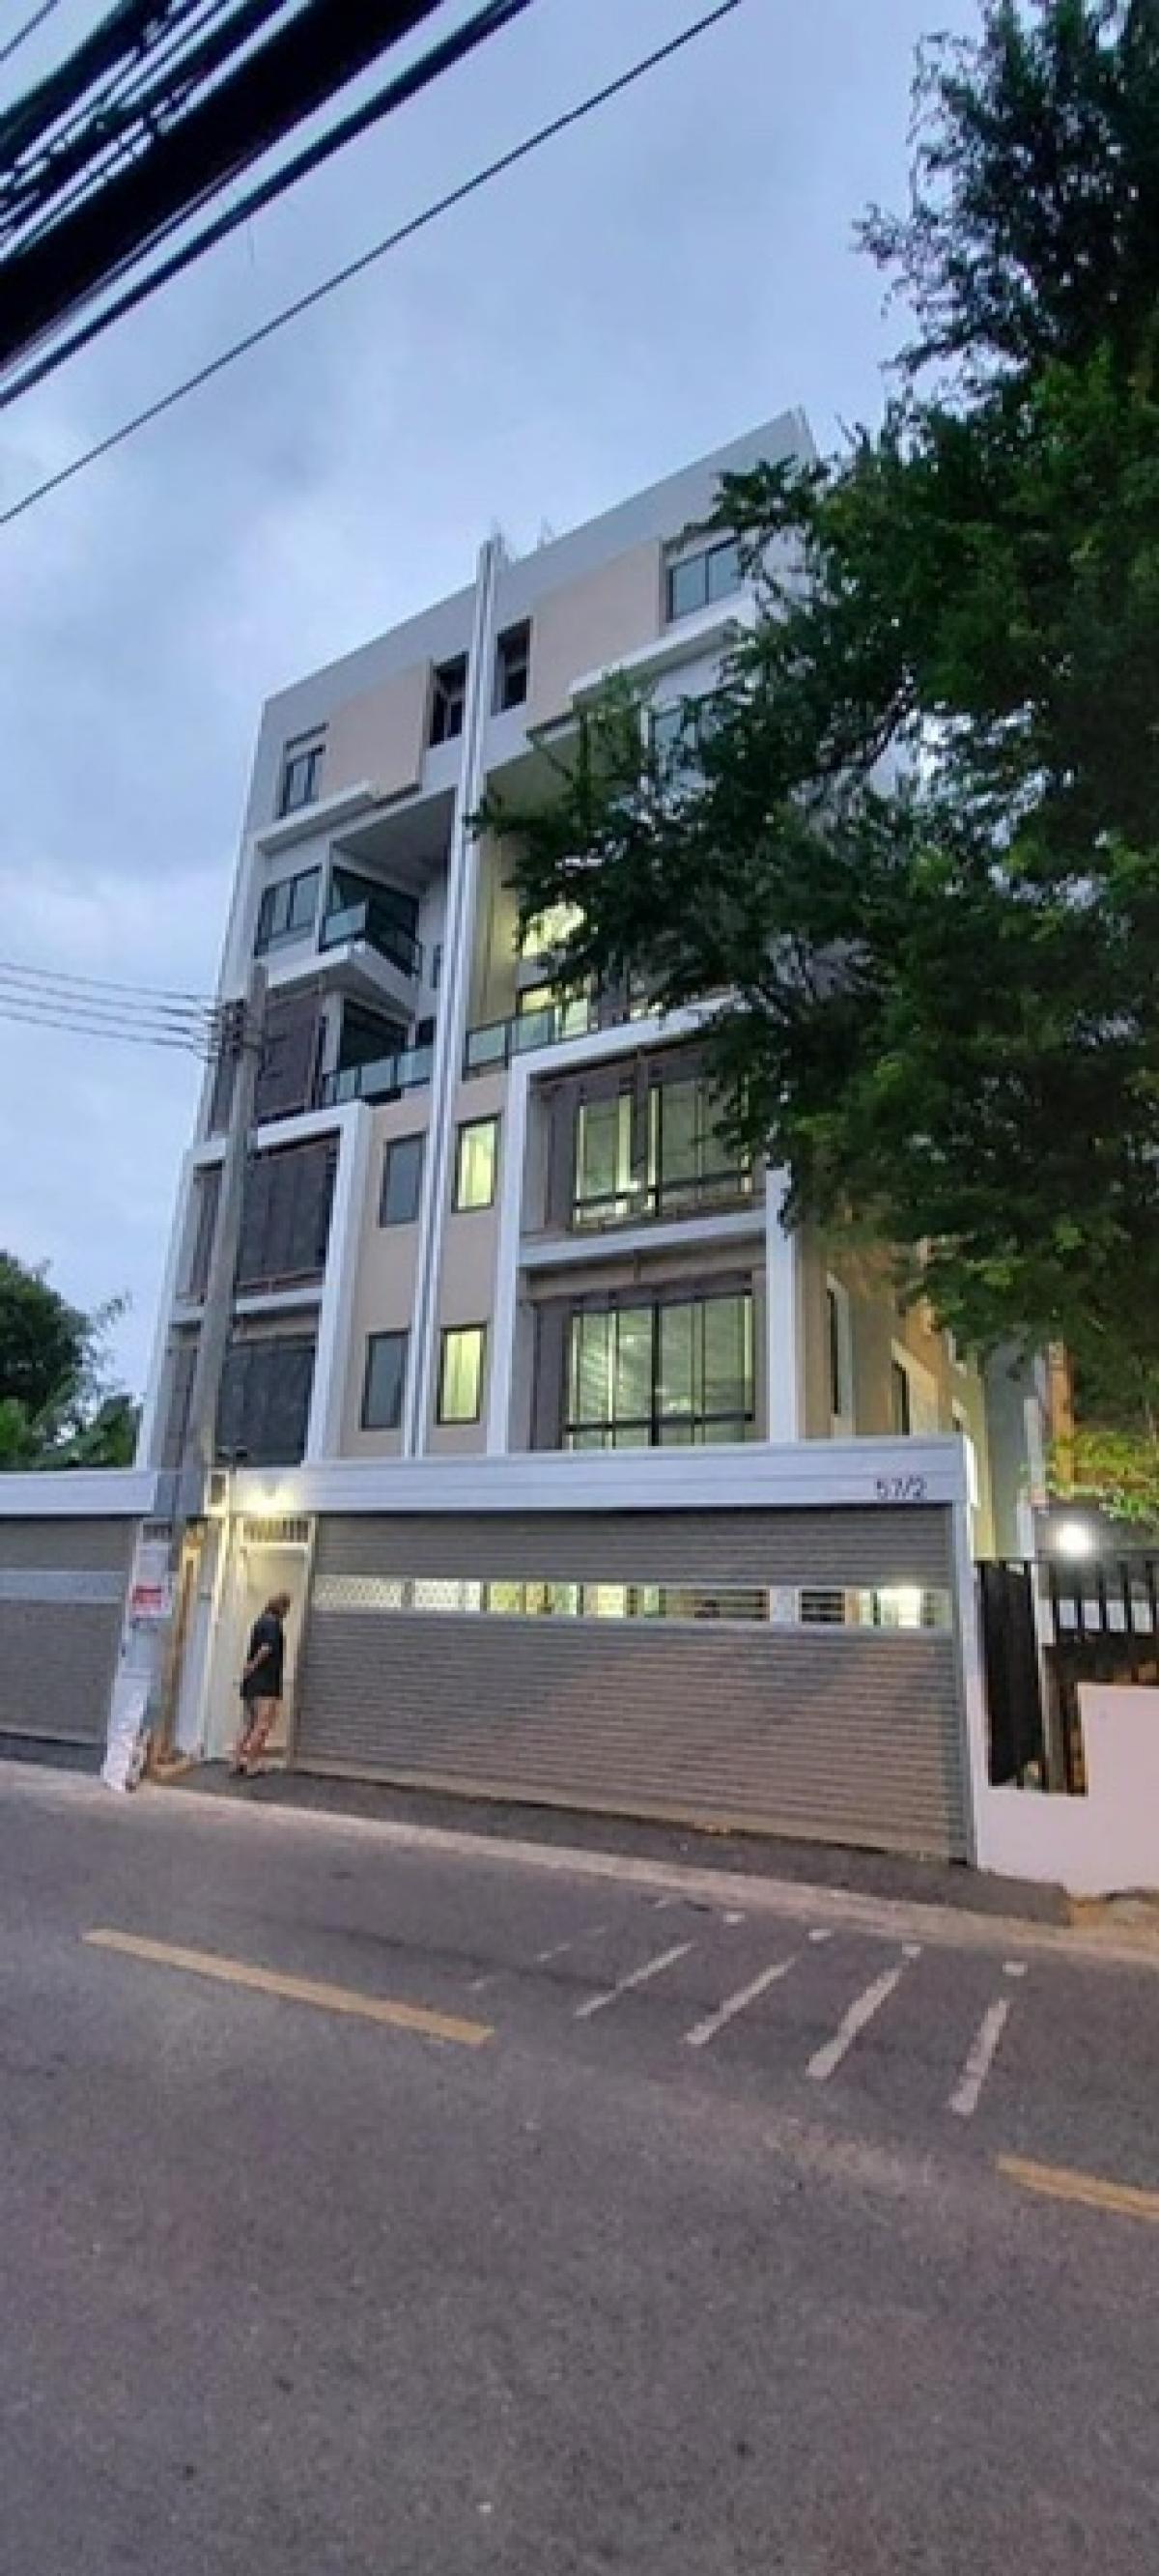 For RentHome OfficeRama9, Petchburi, RCA : Want to rent a 6-story home office, 1 elevator, can park 3 cars. Tenants can also live on floors 4-6 in Soi Rama IX 26.